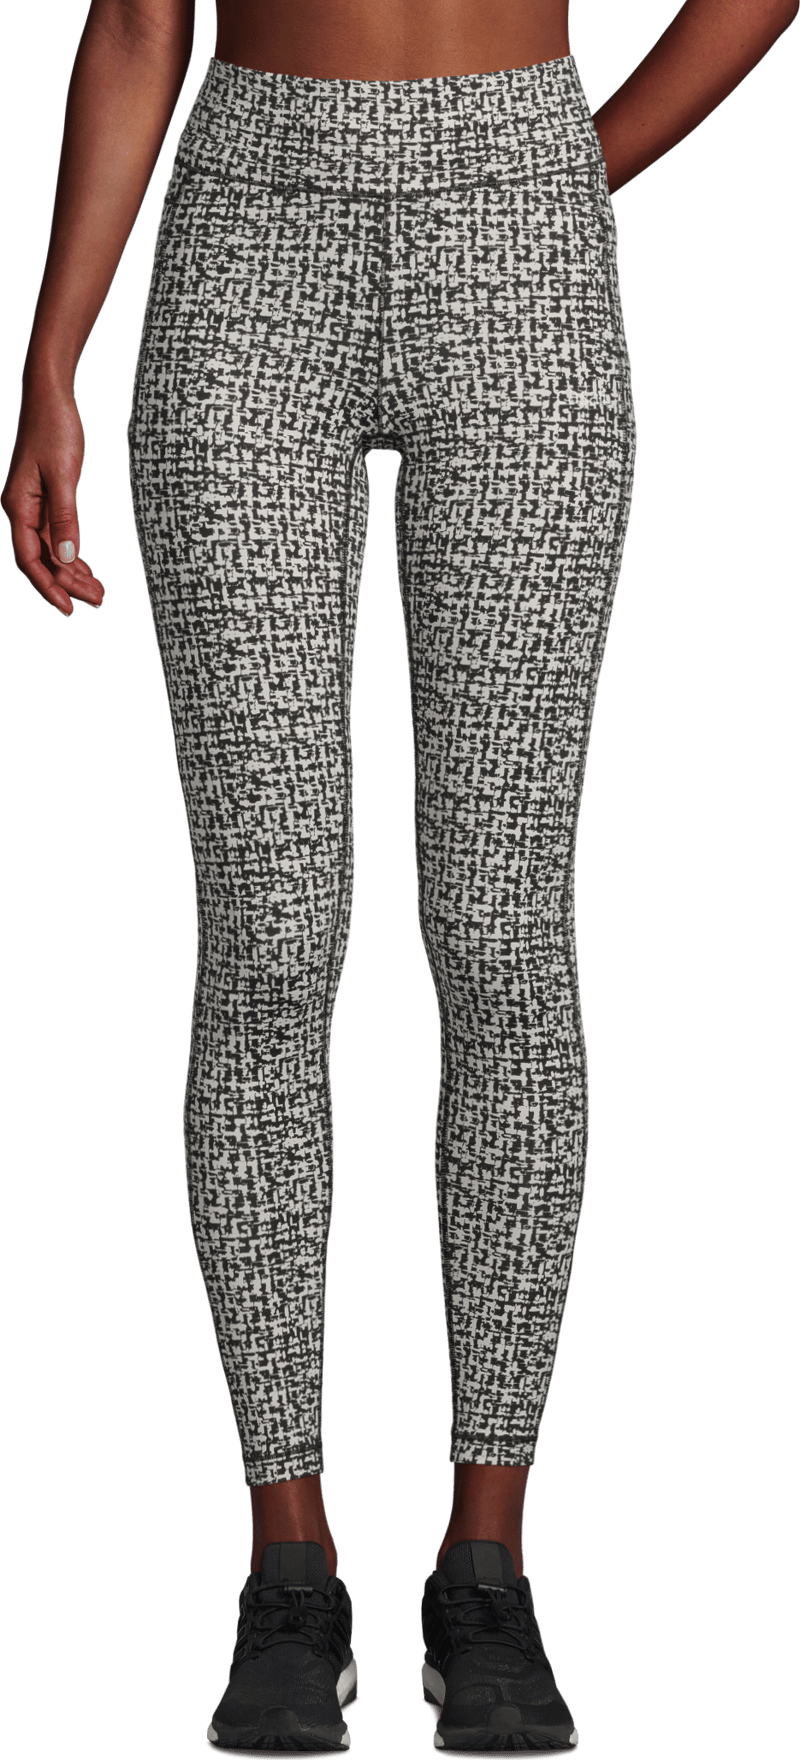 https://www.fjellsport.no/assets/blobs/casall-women-s-iconic-printed-7-8-tights-infinite-beige-ccd8b1a061.png?w=800